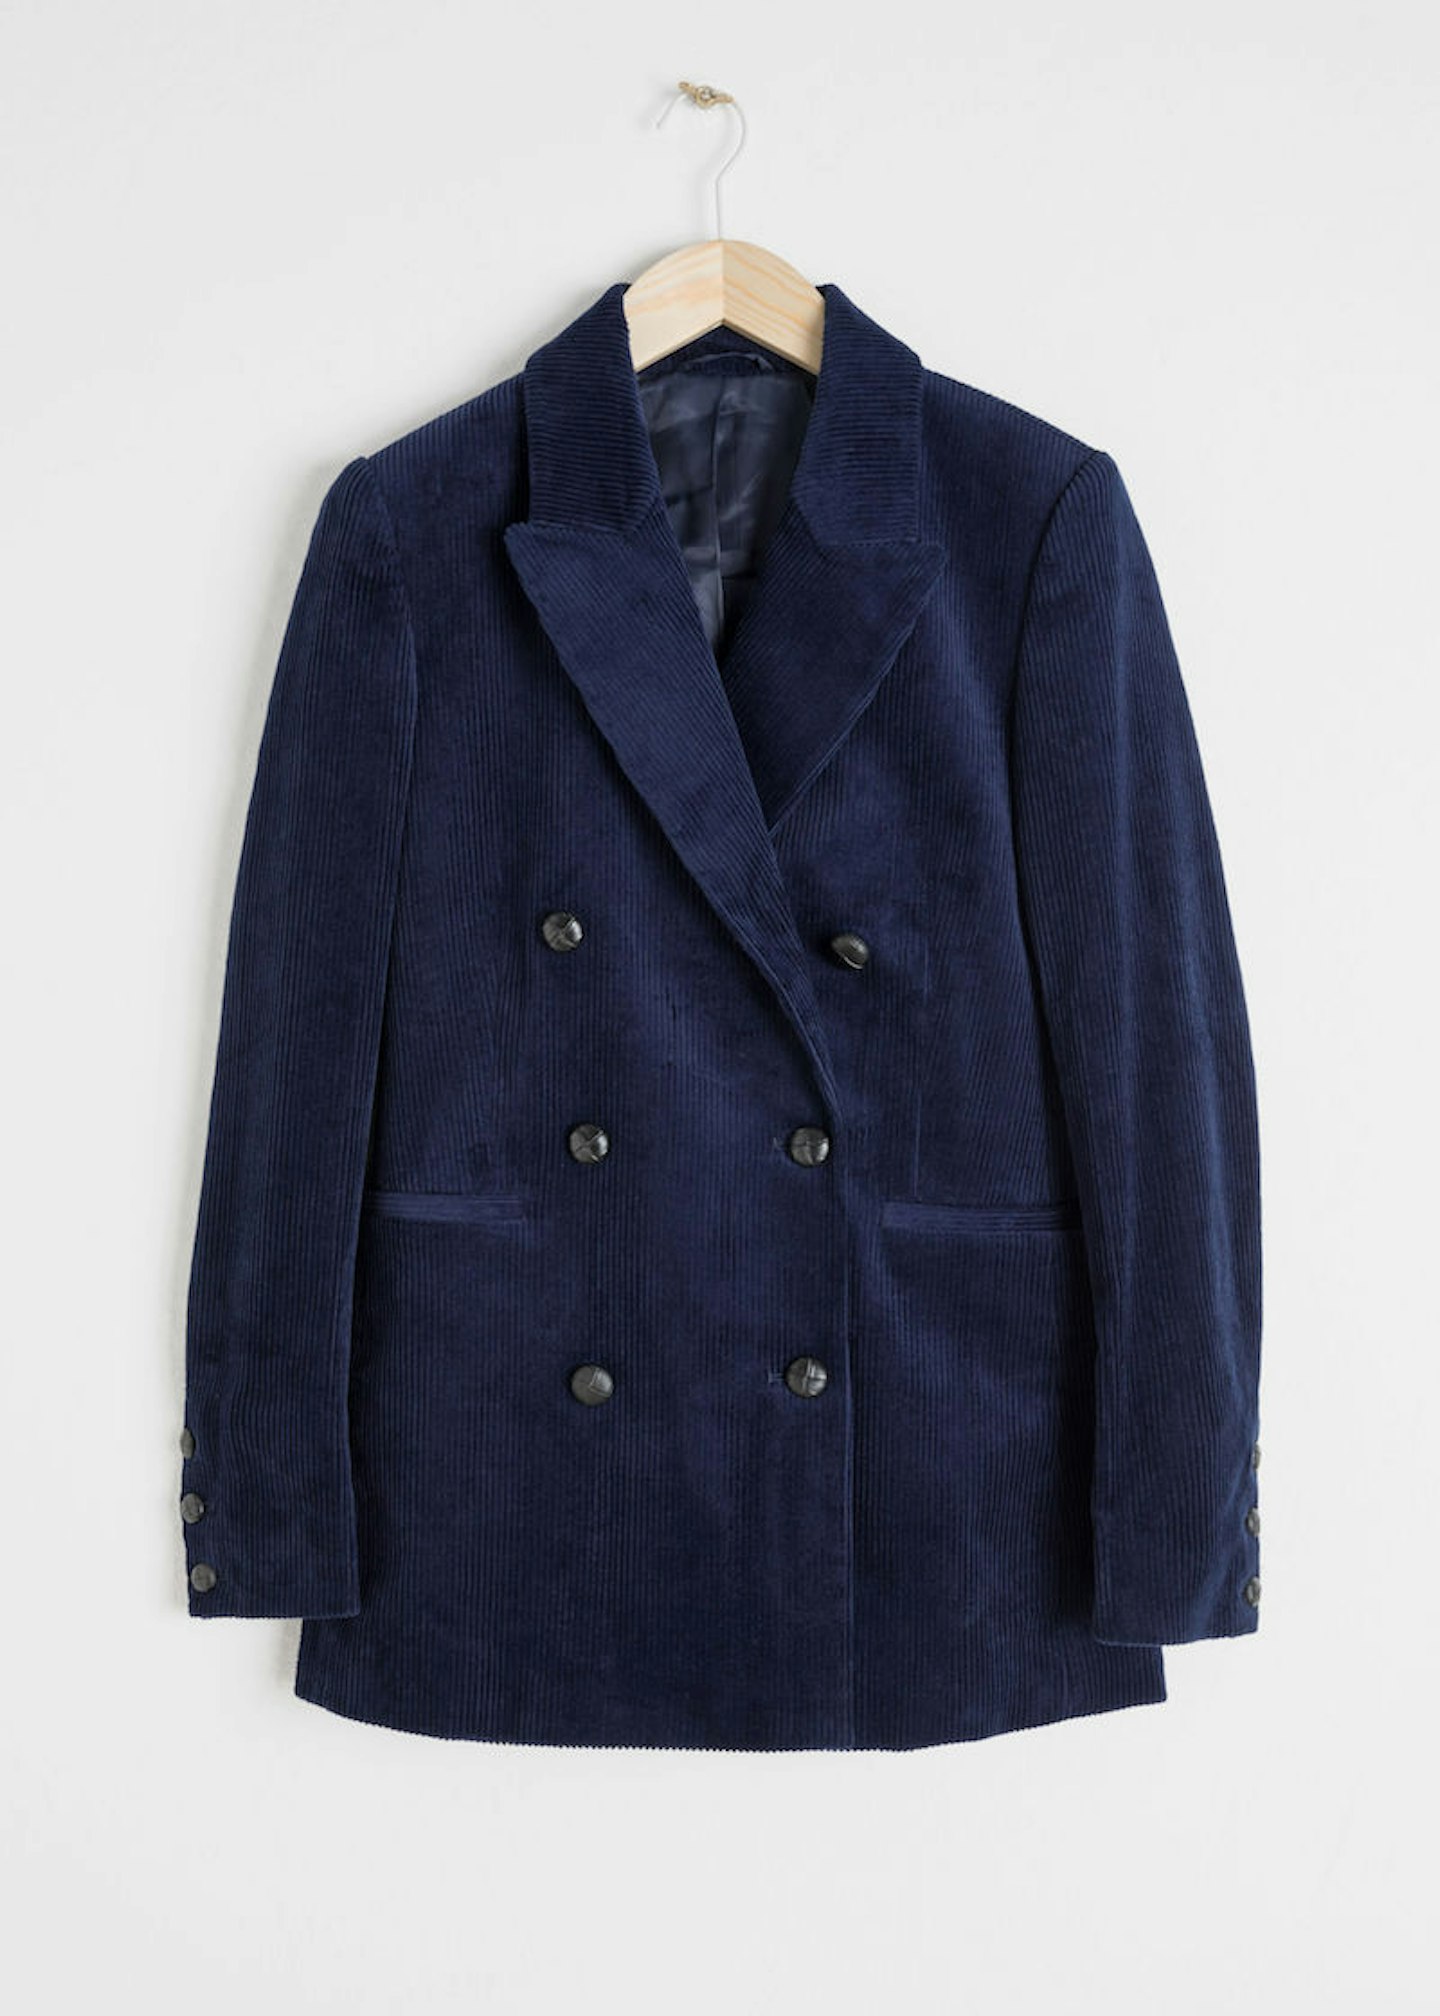 & Other Stories, Double Breasted Corduroy Blazer, £85